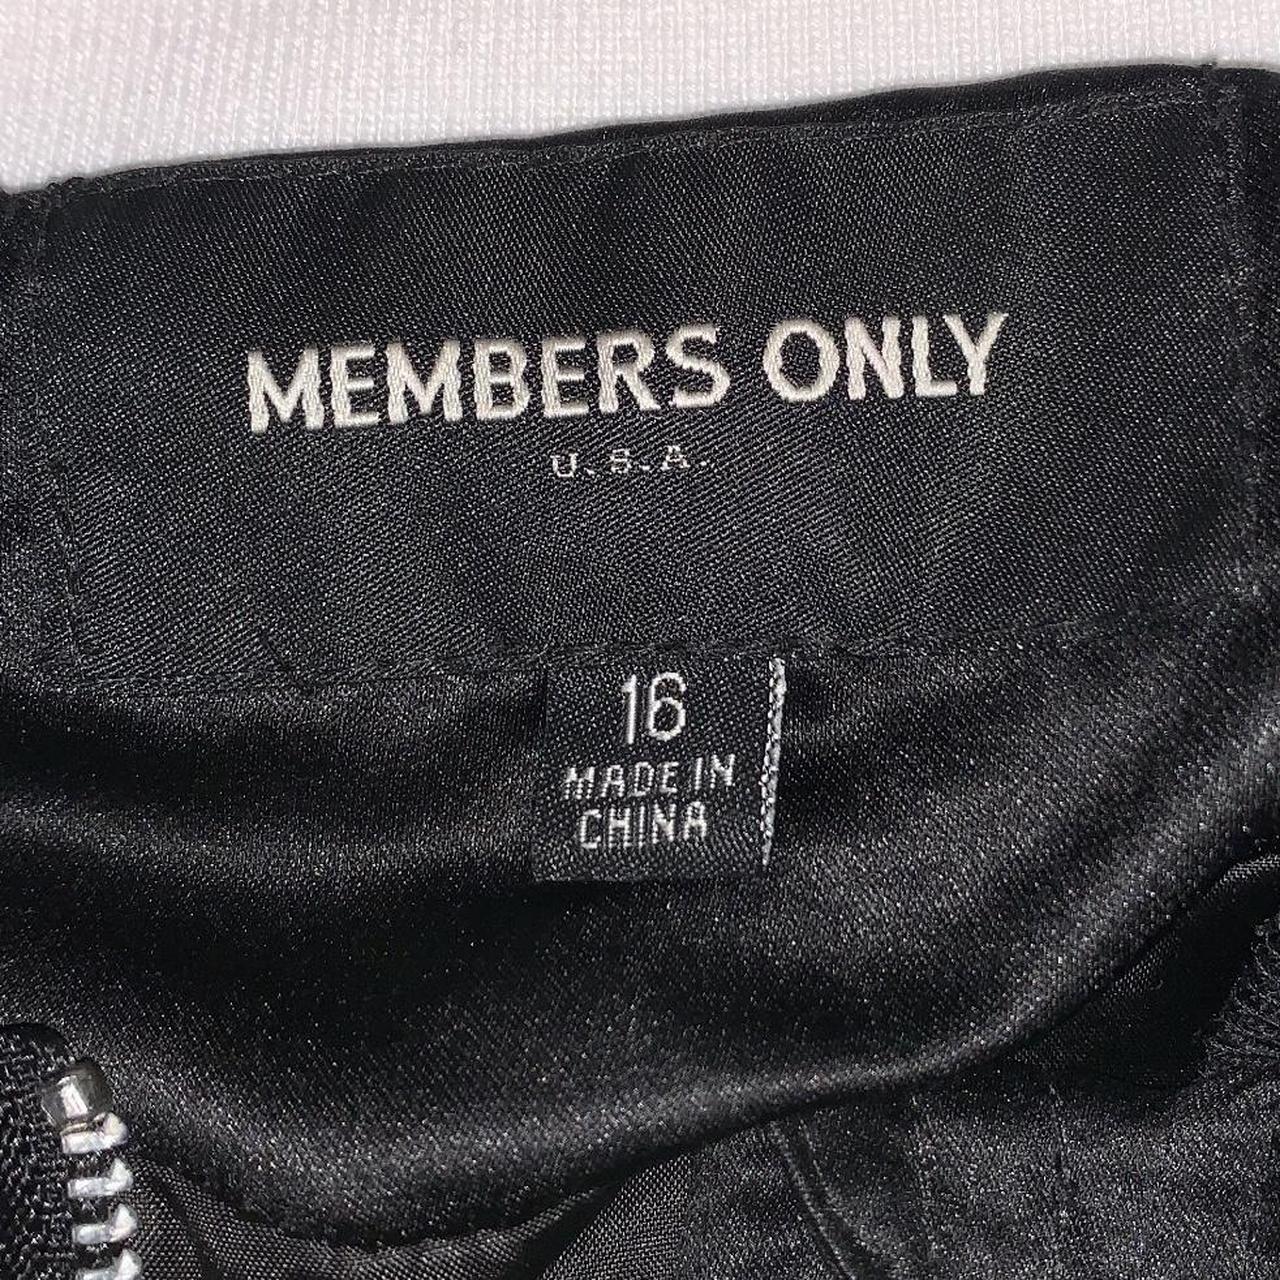 Members Only Women's Black and White Jacket (4)